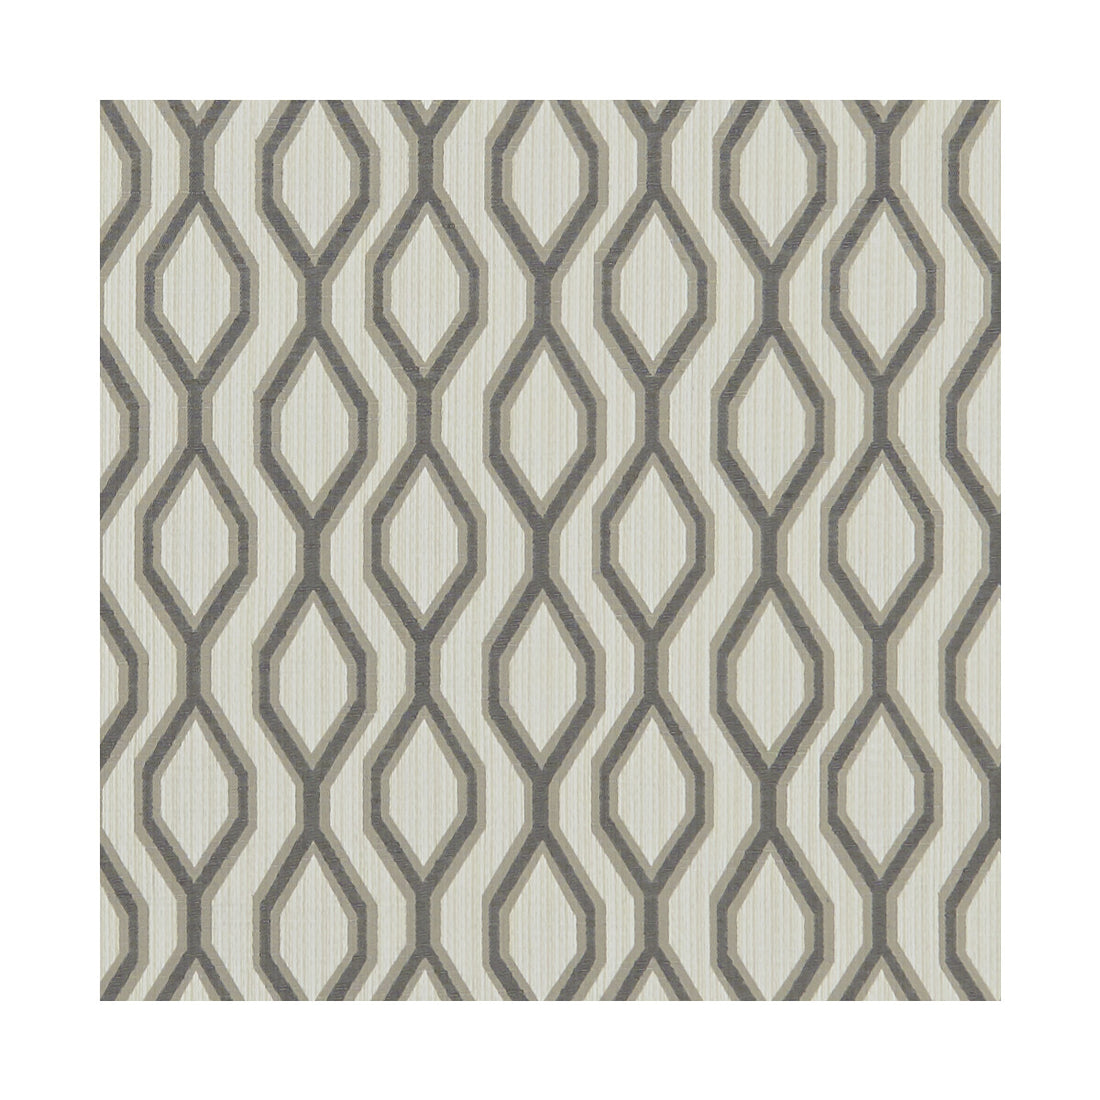 Hadley fabric in charcoal color - pattern F1237/02.CAC.0 - by Clarke And Clarke in the Marbury By Studio G For C&amp;C collection